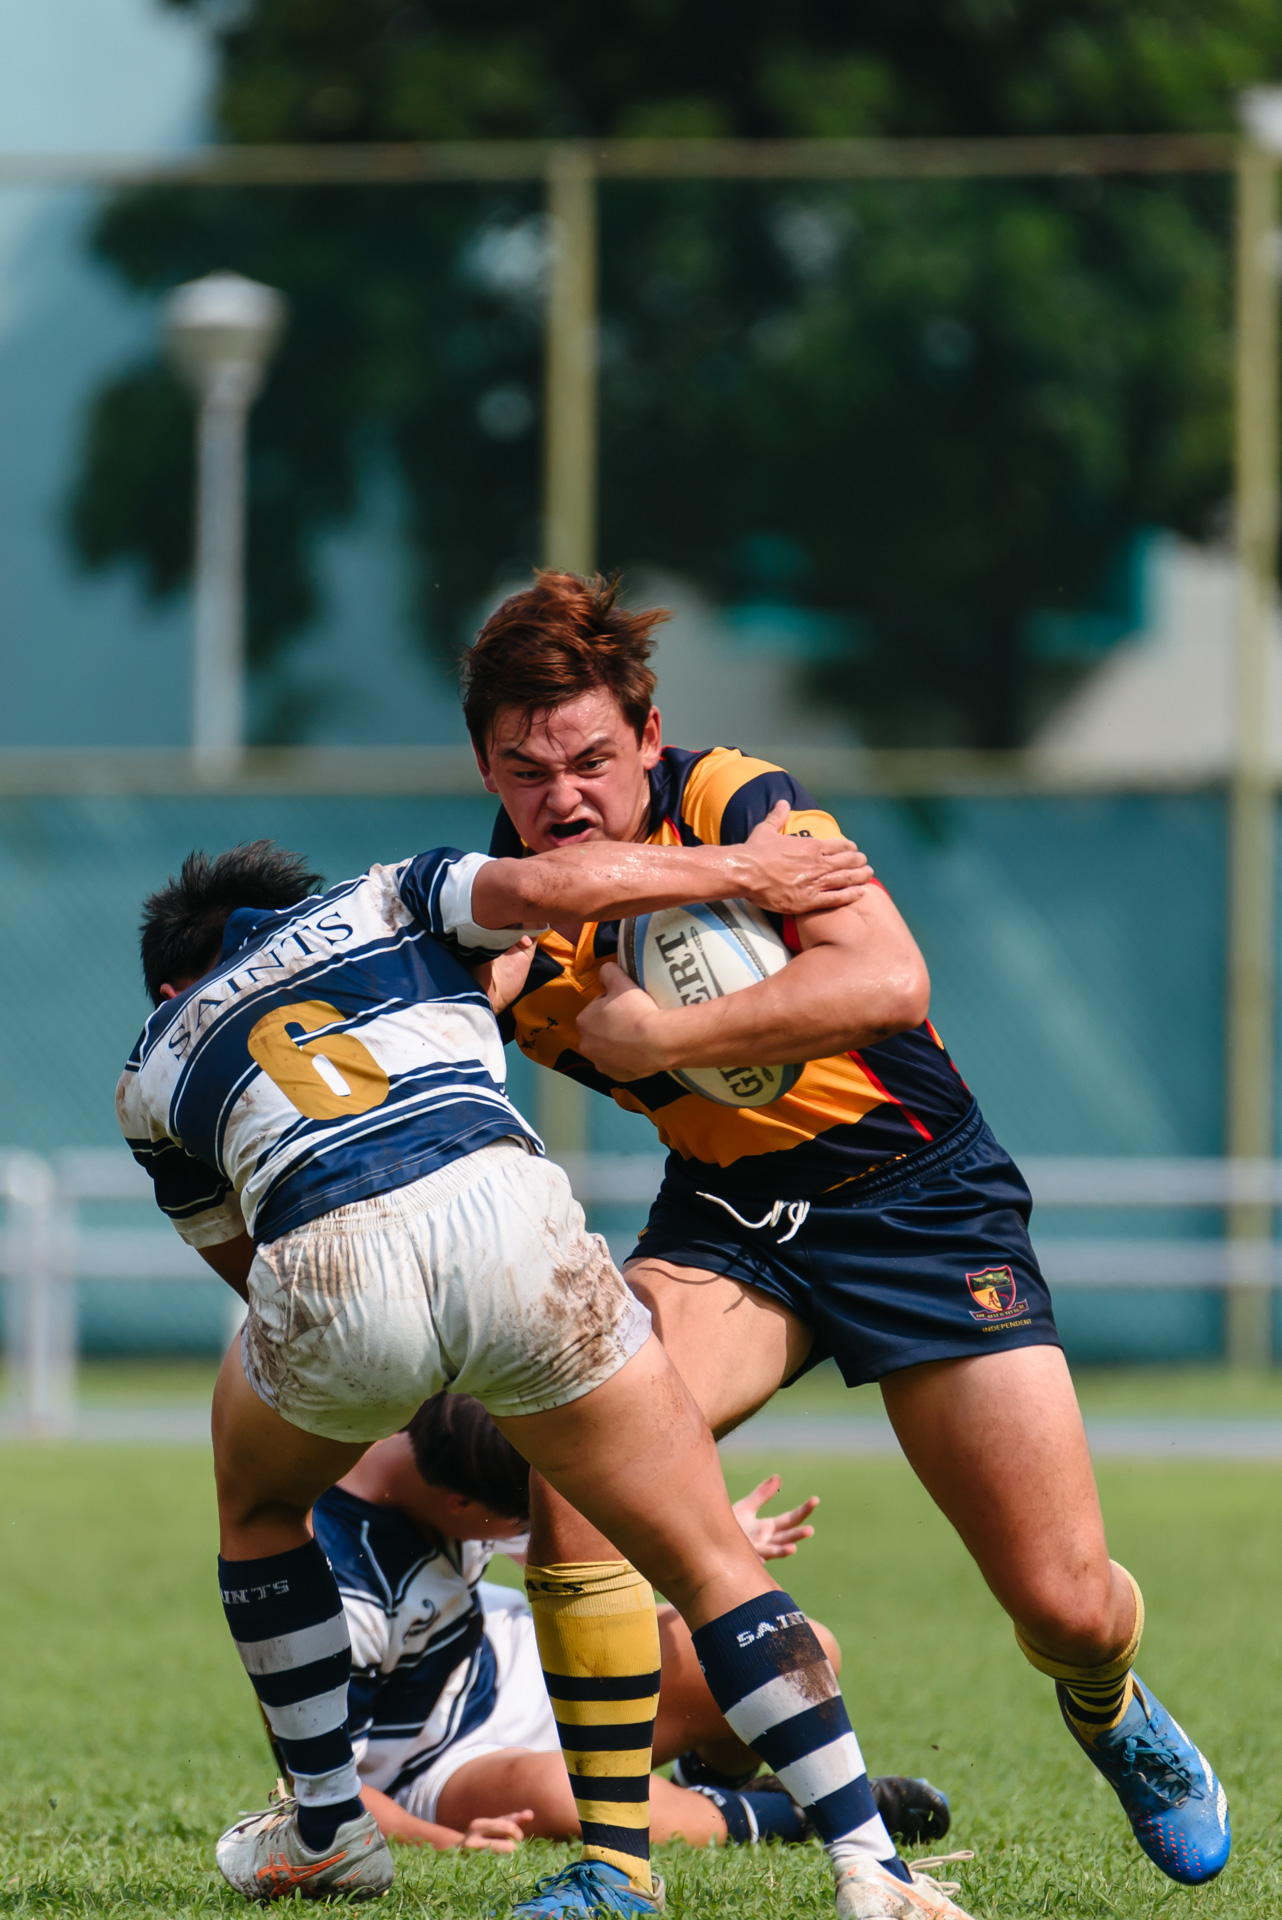 ACS(I)’s Oscar McEwin (#26) swats off an SAJC defender on his way to the try line. (Photo 7 © Jared Chow/Red Sports)